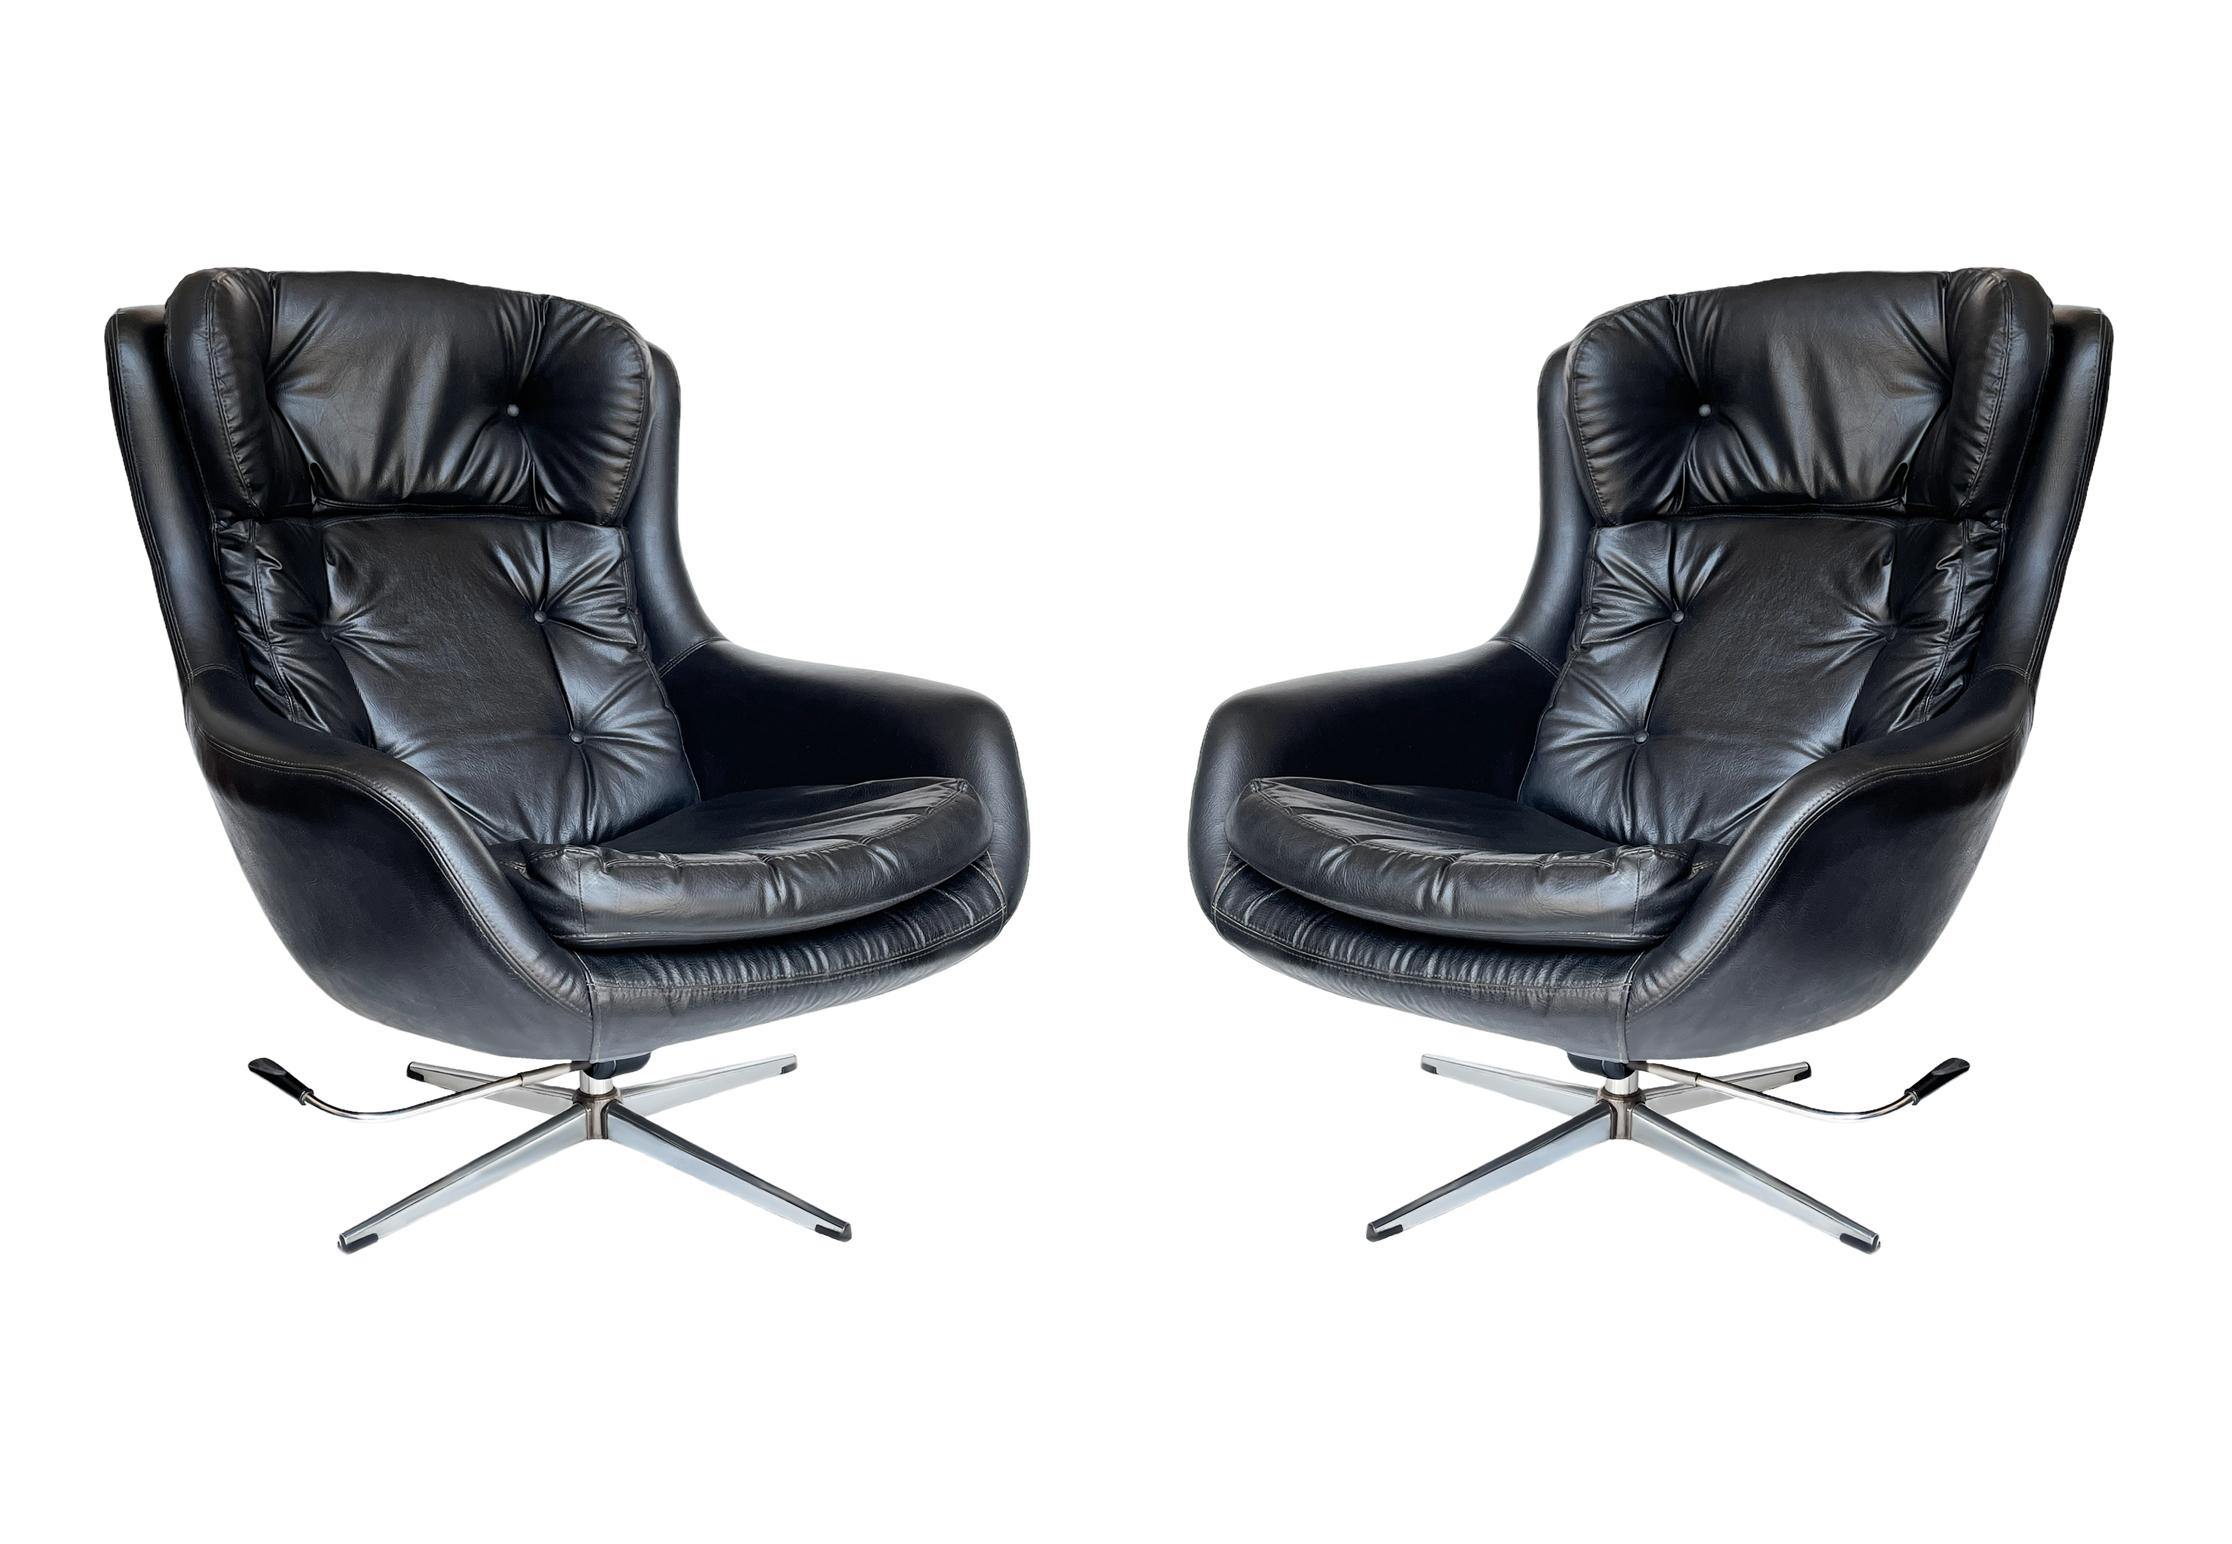 Mid-20th Century Pair of Mid Century Modern Black Swivel Lounge Chairs by Overman Sweden  For Sale